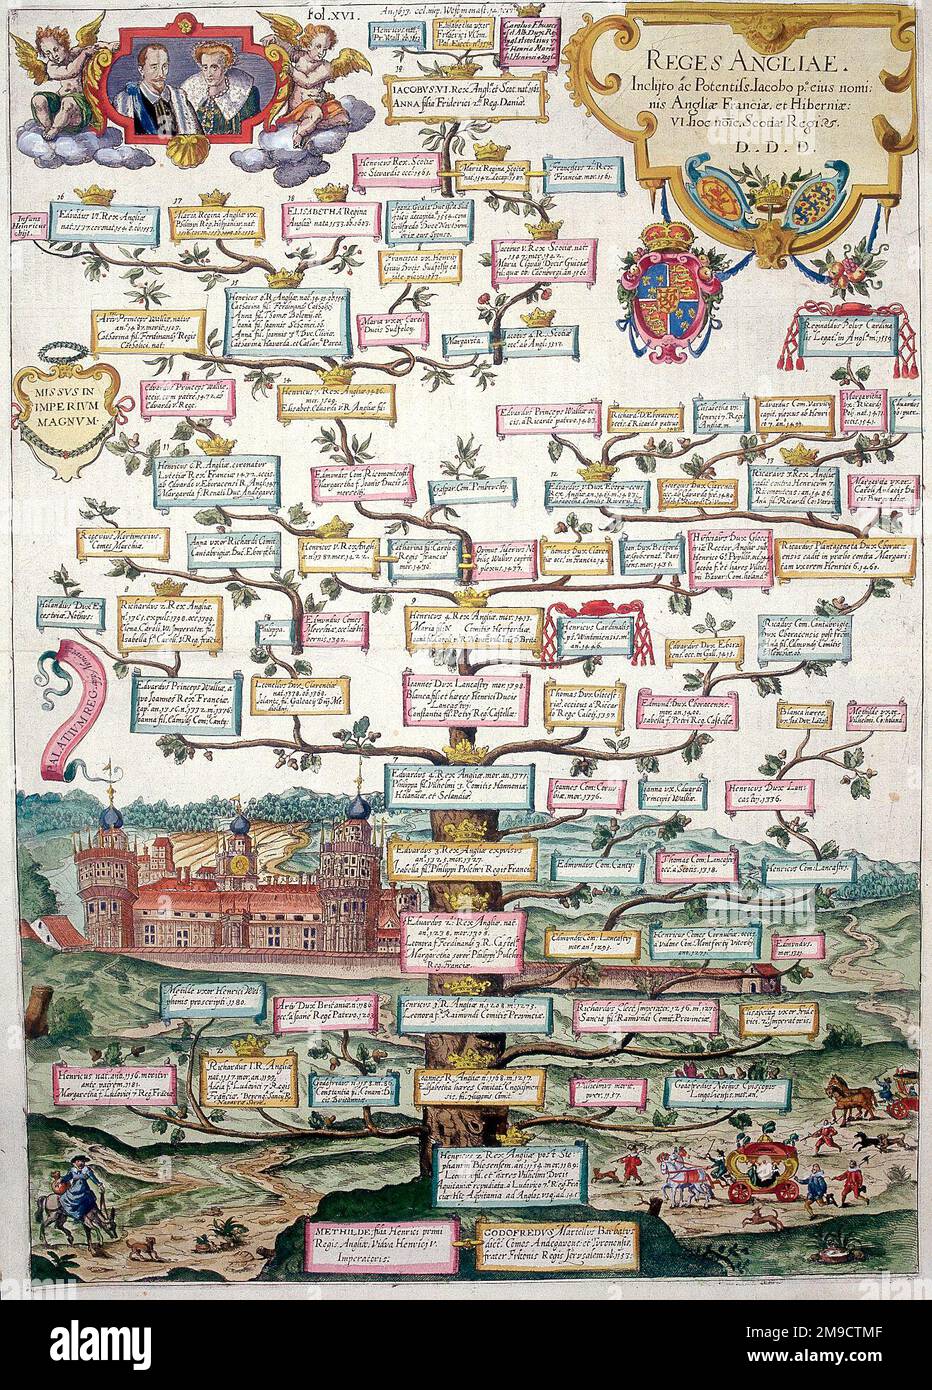 Reges Angliae - Family Tree of the Kings of England - British Royalty from the 12th to the 16th century from Empress Matilda to King James Stock Photo